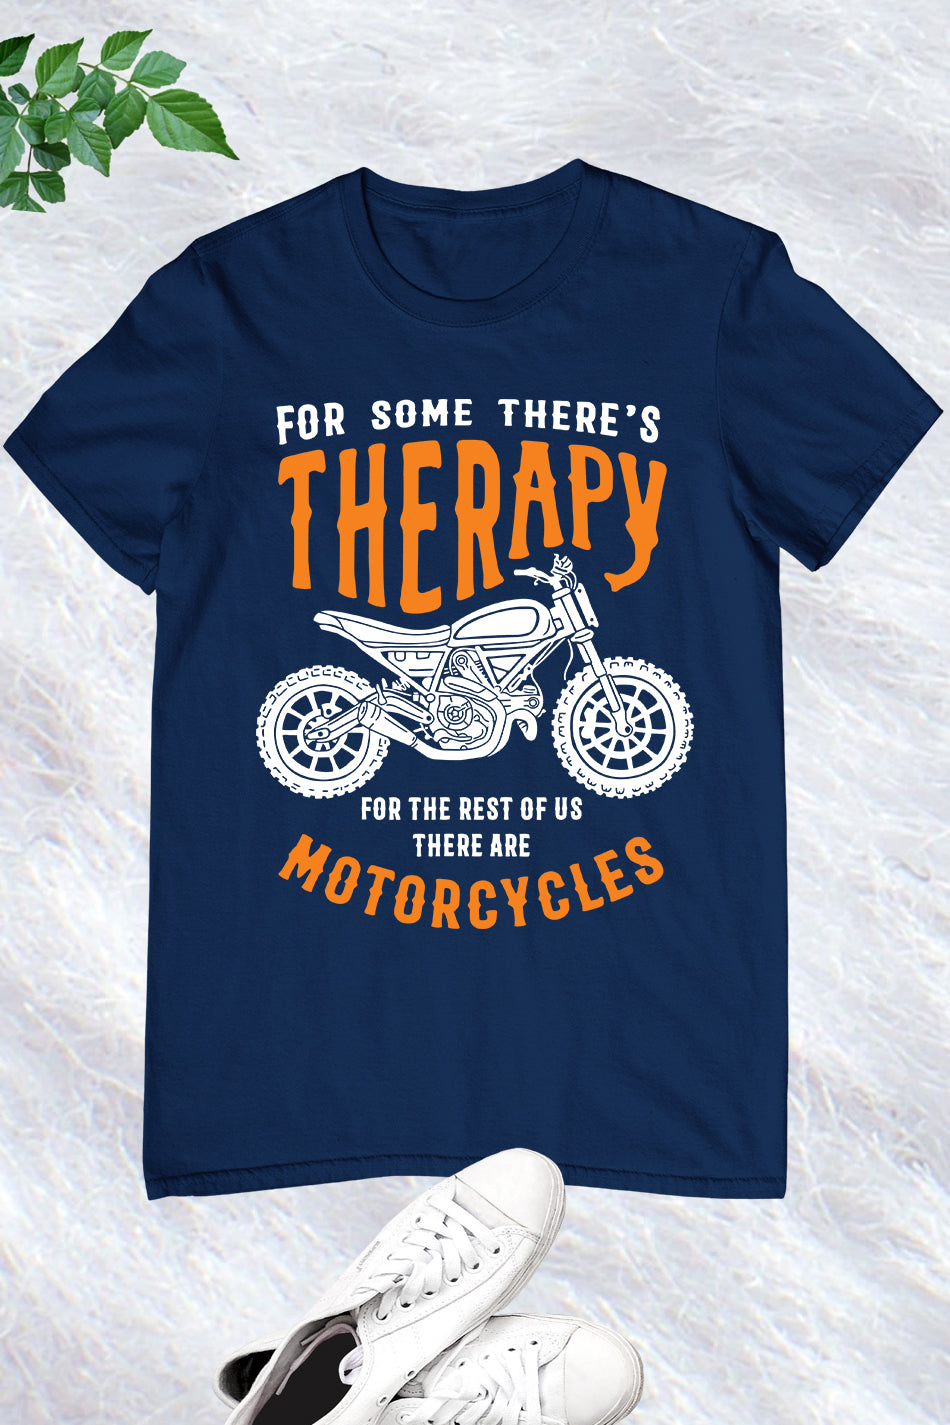 For some There's Therapy Motorcycle Shirt